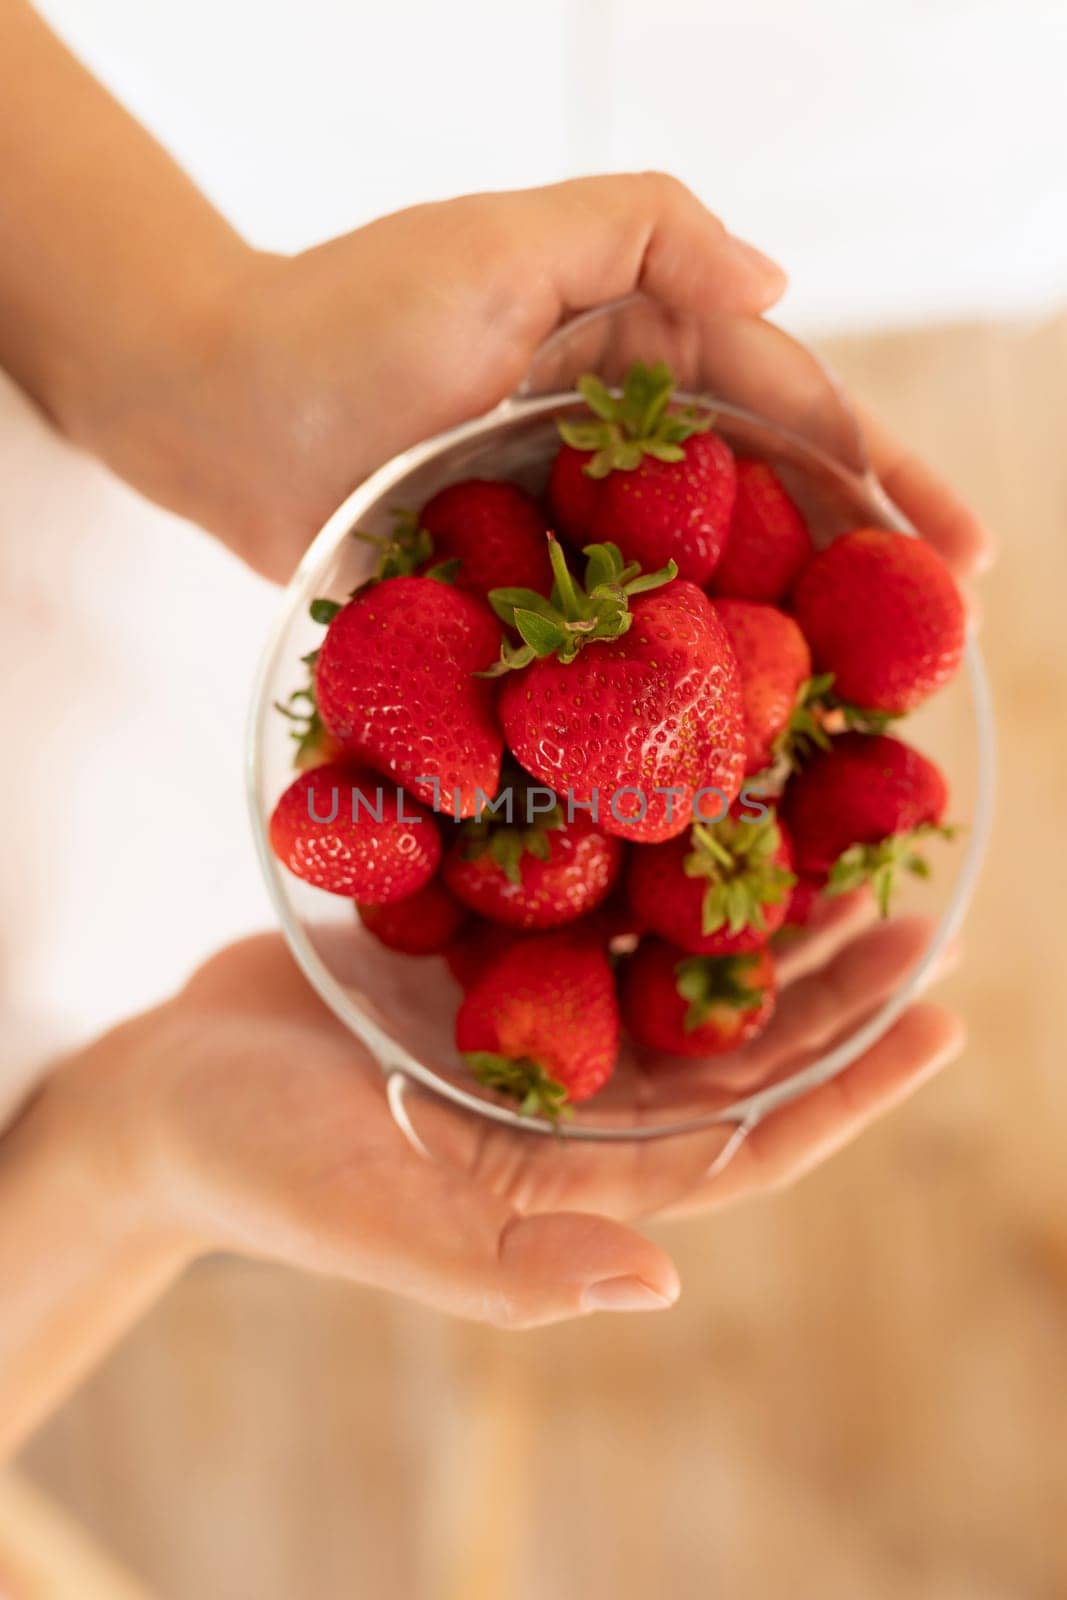 A close-up of fresh farm strawberries in hand.